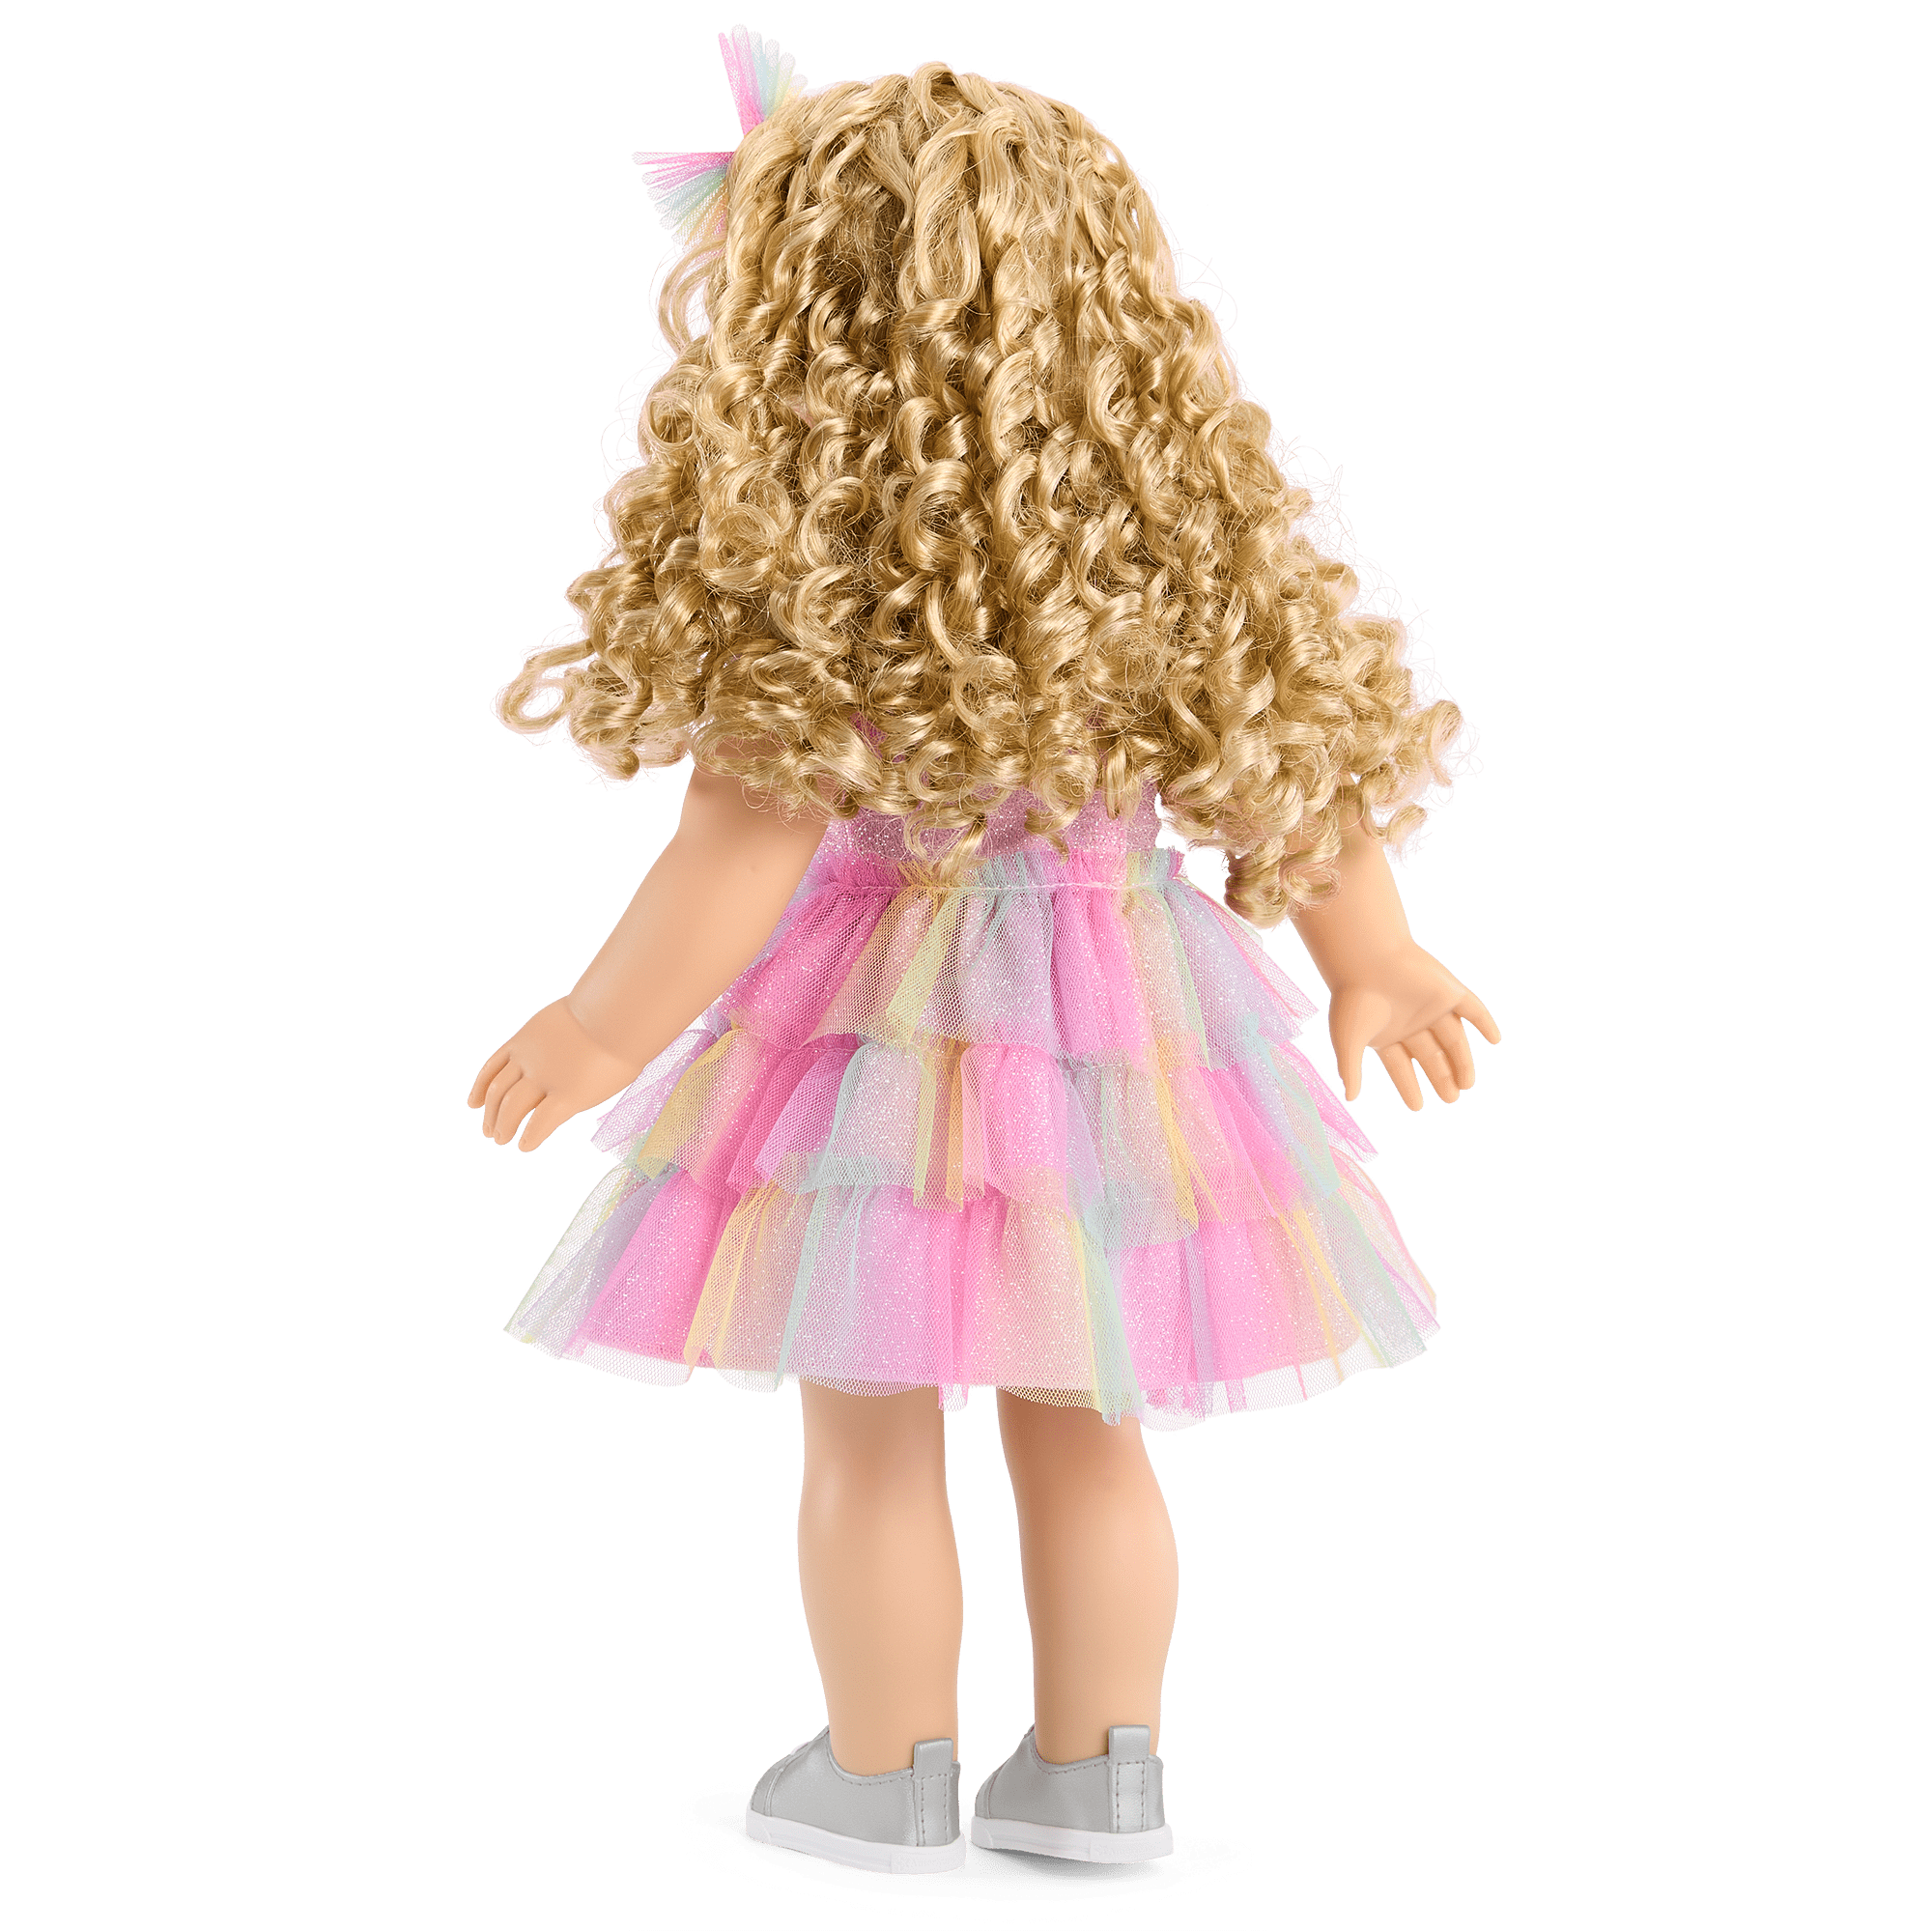 Pastel Party Dress for 18-inch Dolls